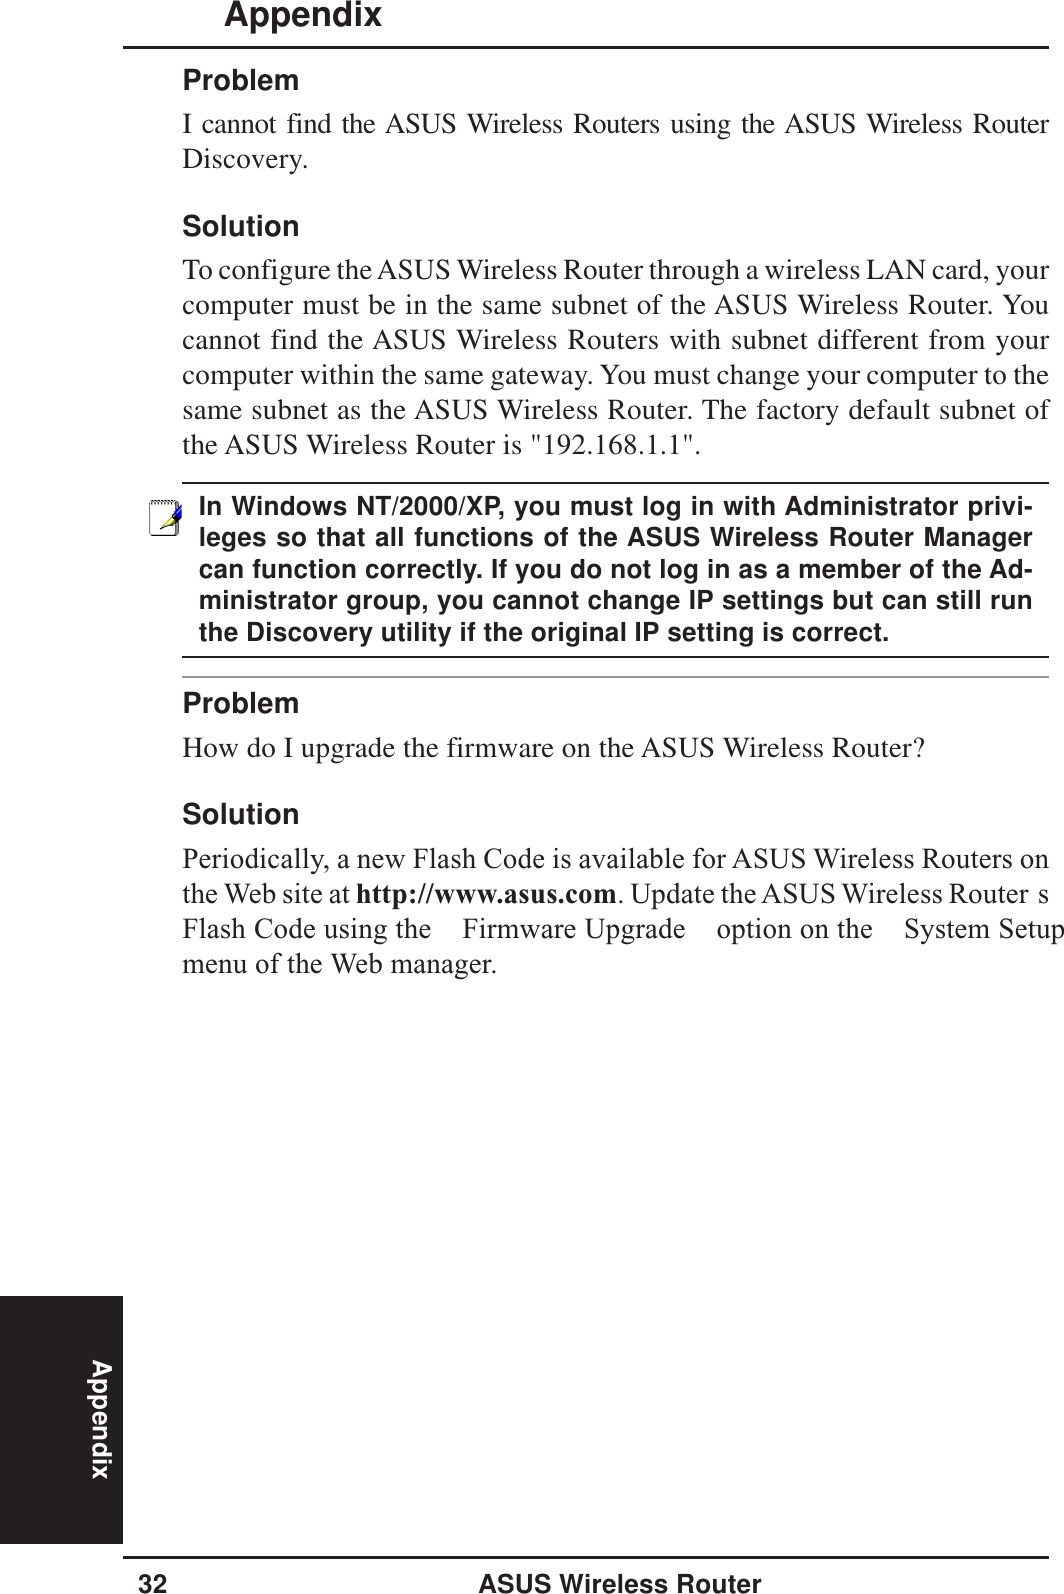 Appendix32 ASUS Wireless RouterAppendixProblemI cannot find the ASUS Wireless Routers using the ASUS Wireless RouterDiscovery.SolutionTo configure the ASUS Wireless Router through a wireless LAN card, yourcomputer must be in the same subnet of the ASUS Wireless Router. Youcannot find the ASUS Wireless Routers with subnet different from yourcomputer within the same gateway. You must change your computer to thesame subnet as the ASUS Wireless Router. The factory default subnet ofthe ASUS Wireless Router is &quot;192.168.1.1&quot;.In Windows NT/2000/XP, you must log in with Administrator privi-leges so that all functions of the ASUS Wireless Router Managercan function correctly. If you do not log in as a member of the Ad-ministrator group, you cannot change IP settings but can still runthe Discovery utility if the original IP setting is correct.ProblemHow do I upgrade the firmware on the ASUS Wireless Router?SolutionPeriodically, a new Flash Code is available for ASUS Wireless Routers onthe Web site at http://www.asus.com. Update the ASUS Wireless Router sFlash Code using the  Firmware Upgrade  option on the  System Setupmenu of the Web manager.